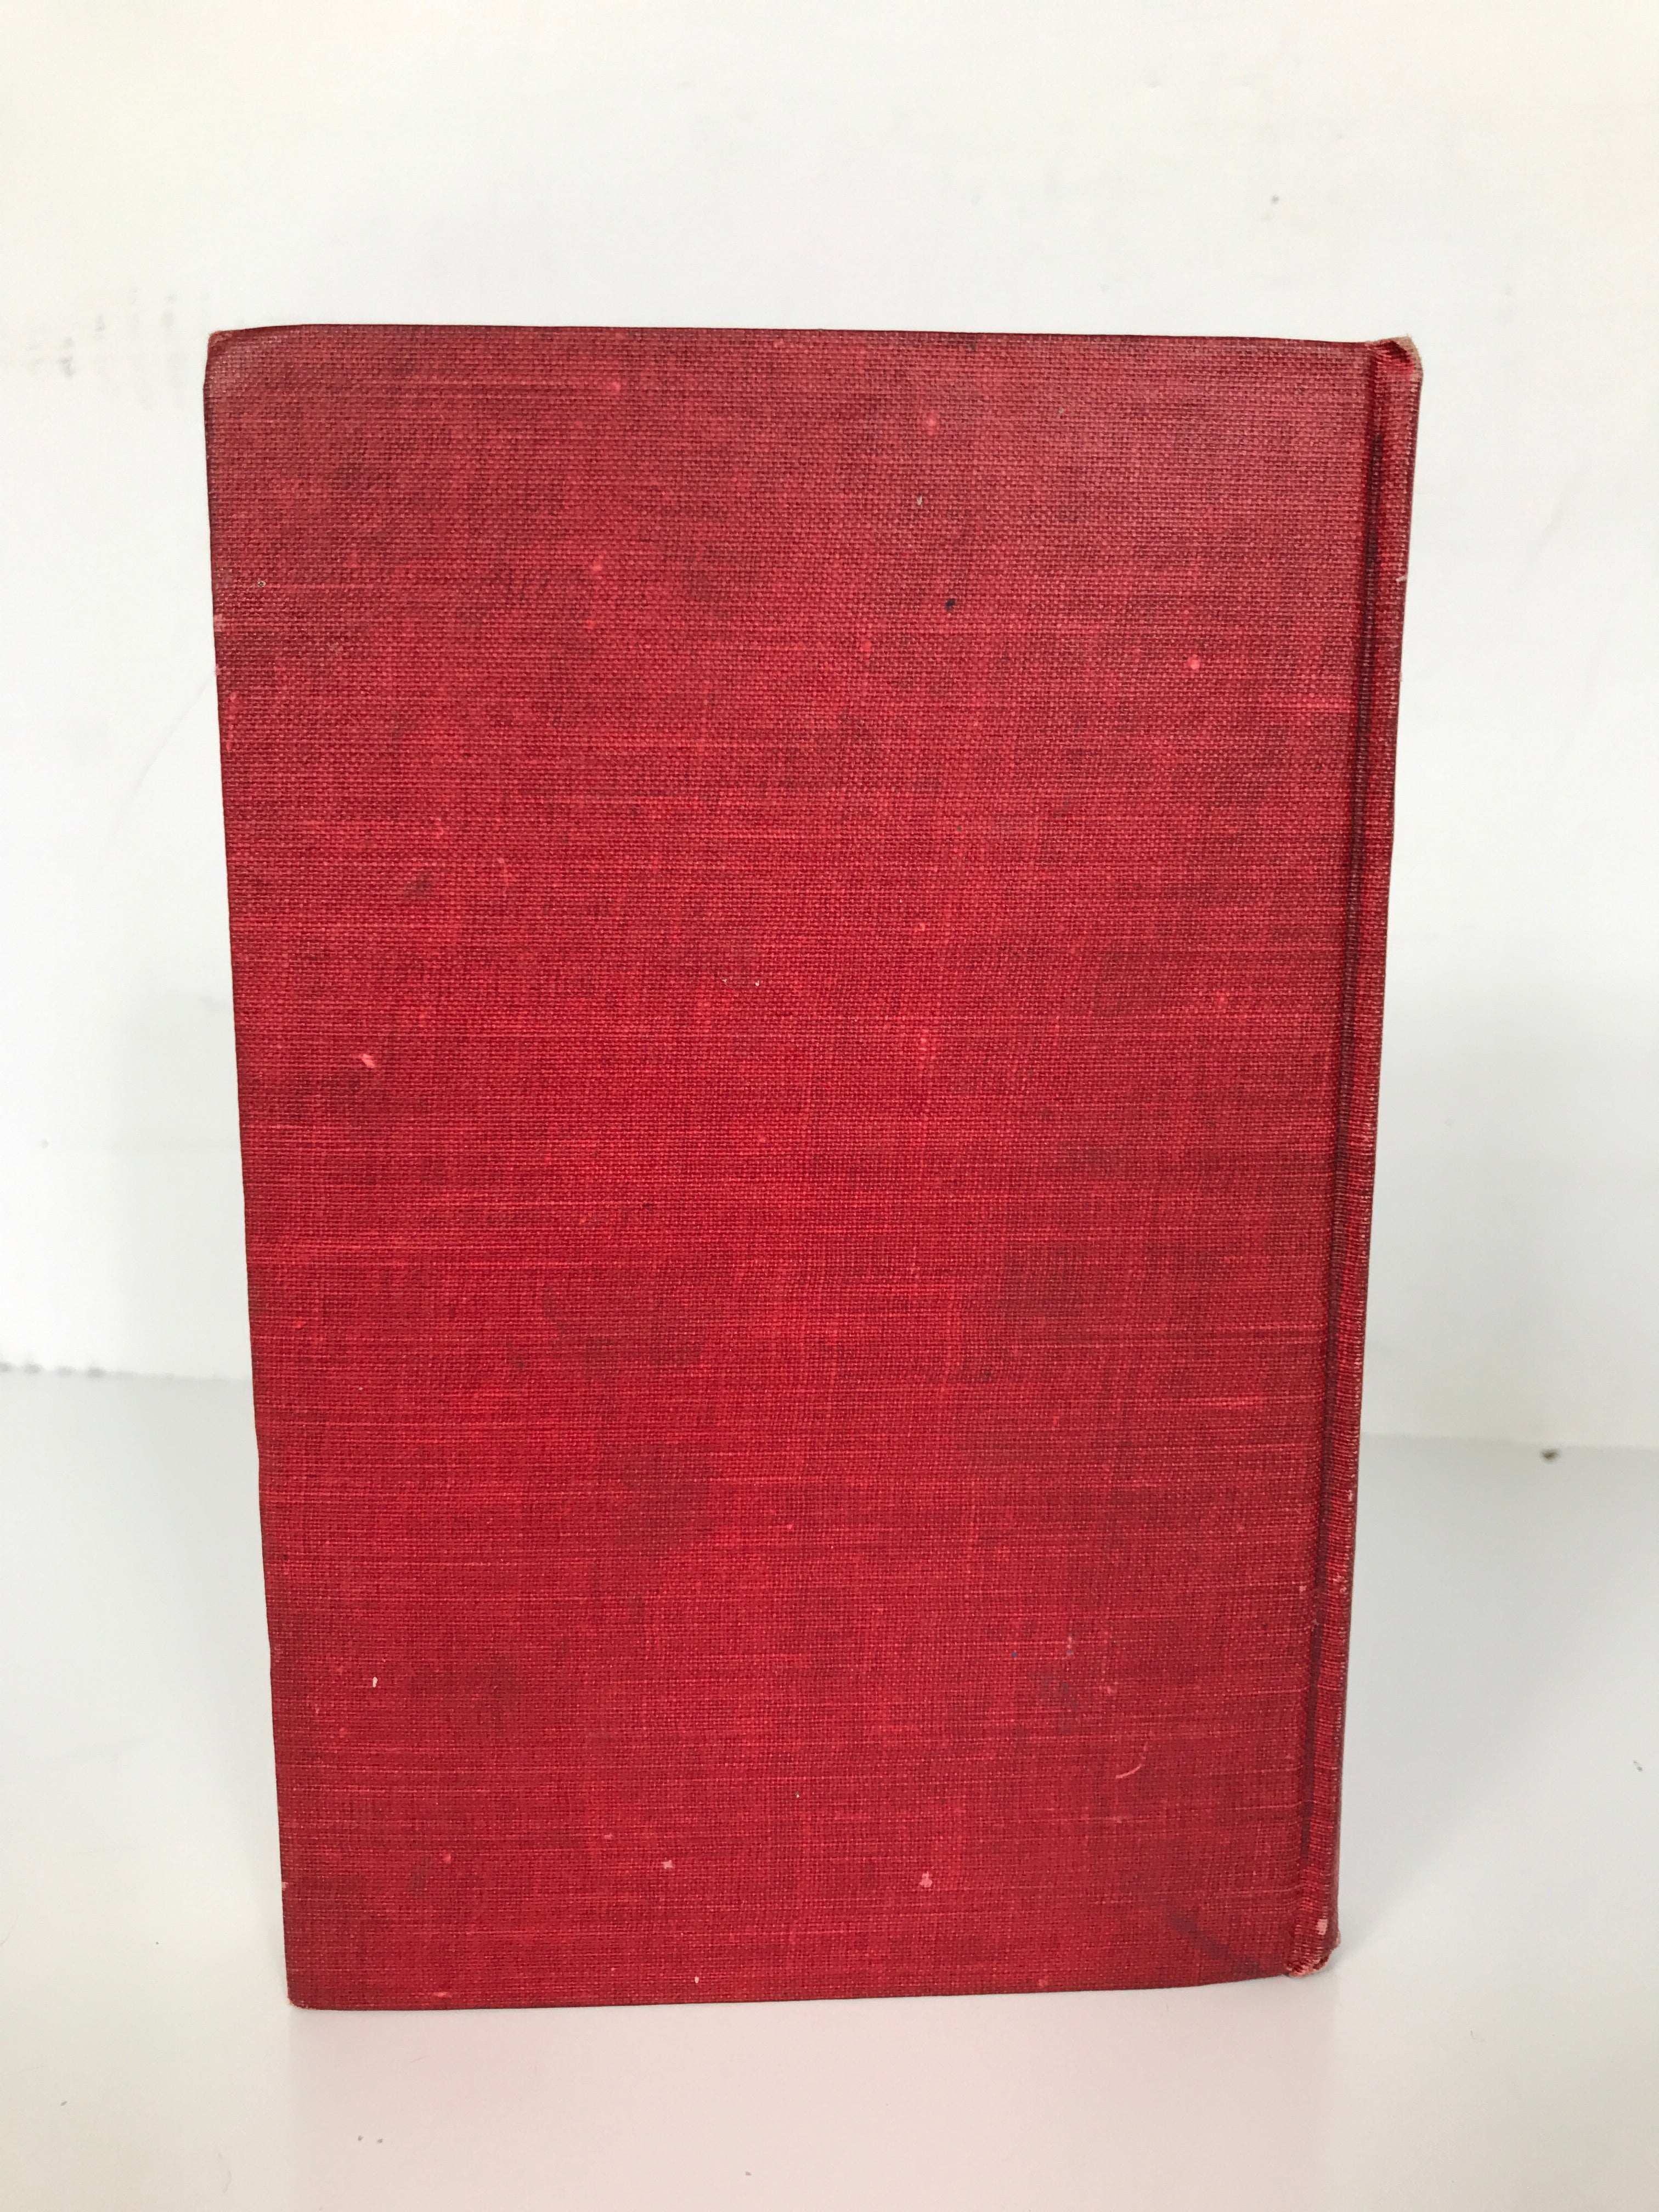 Twenty-six and One by Maxime Gorky (1902) Translated from the Russian Antique HC